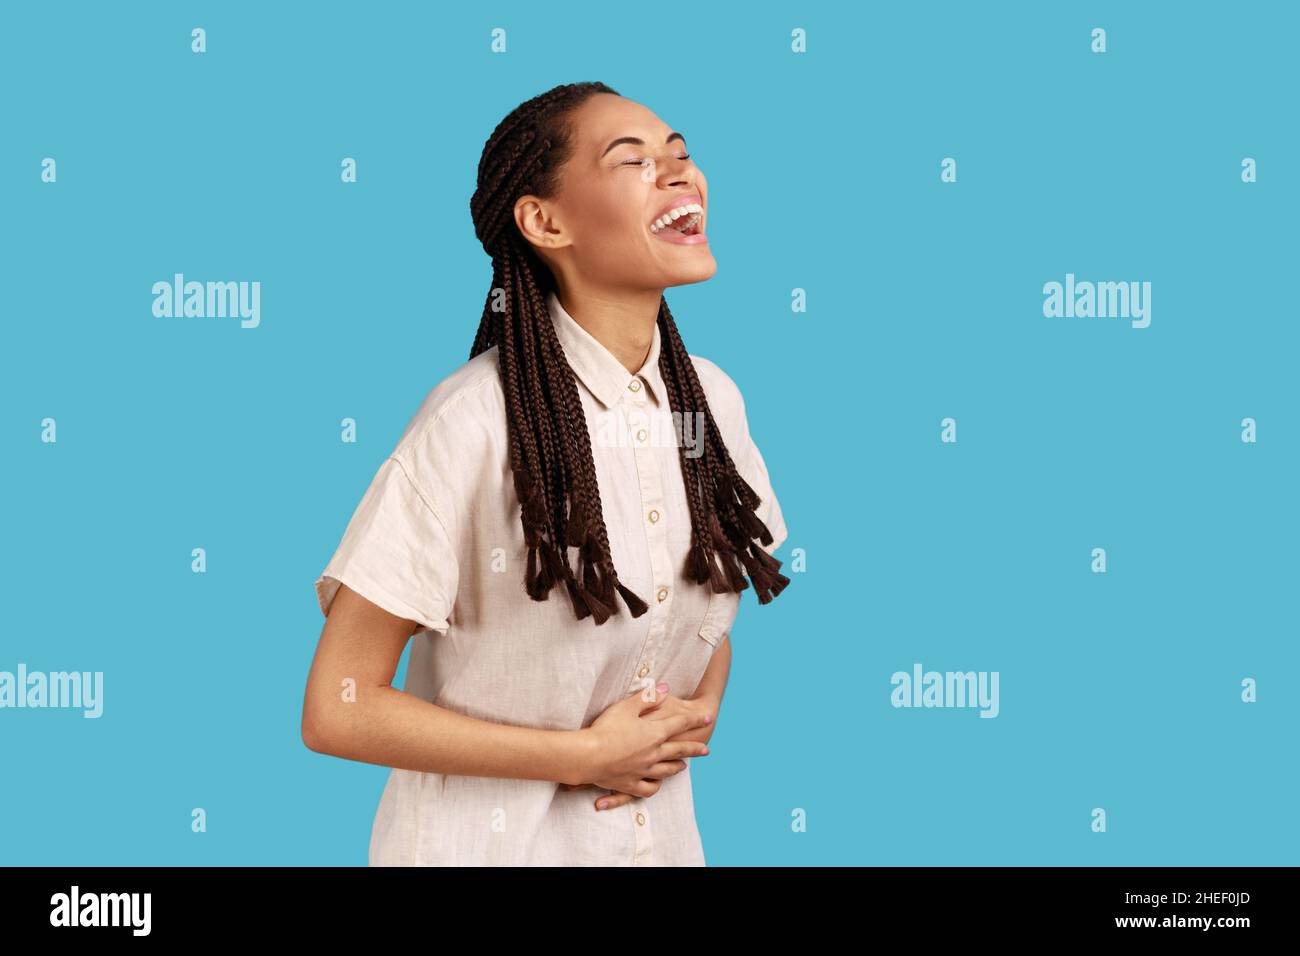 Portrait of happy beautiful woman with black dreadlocks laughing out loud, hearing funny joke, expressing positive, wearing white shirt. Indoor studio shot isolated on blue background. Stock Photo